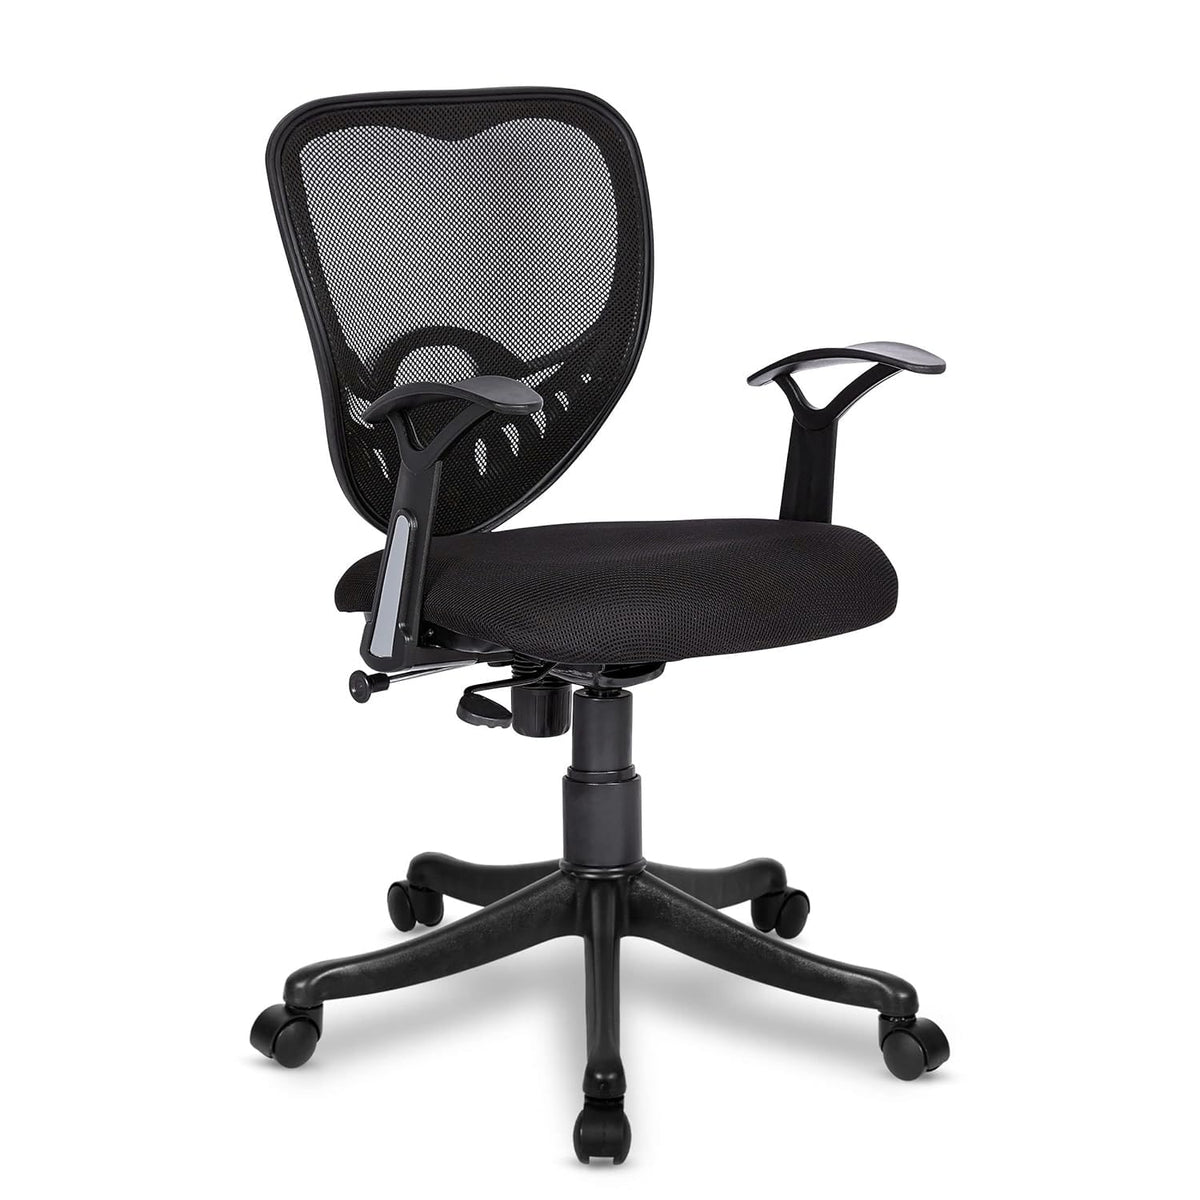 SmileSellers Star Execuative Ergonomic Office Chair| Height Adjustable Seat | Upholstered Seat and T Type armrest Provides Better Comfort |Push Back Tilt Feature |Mid Back